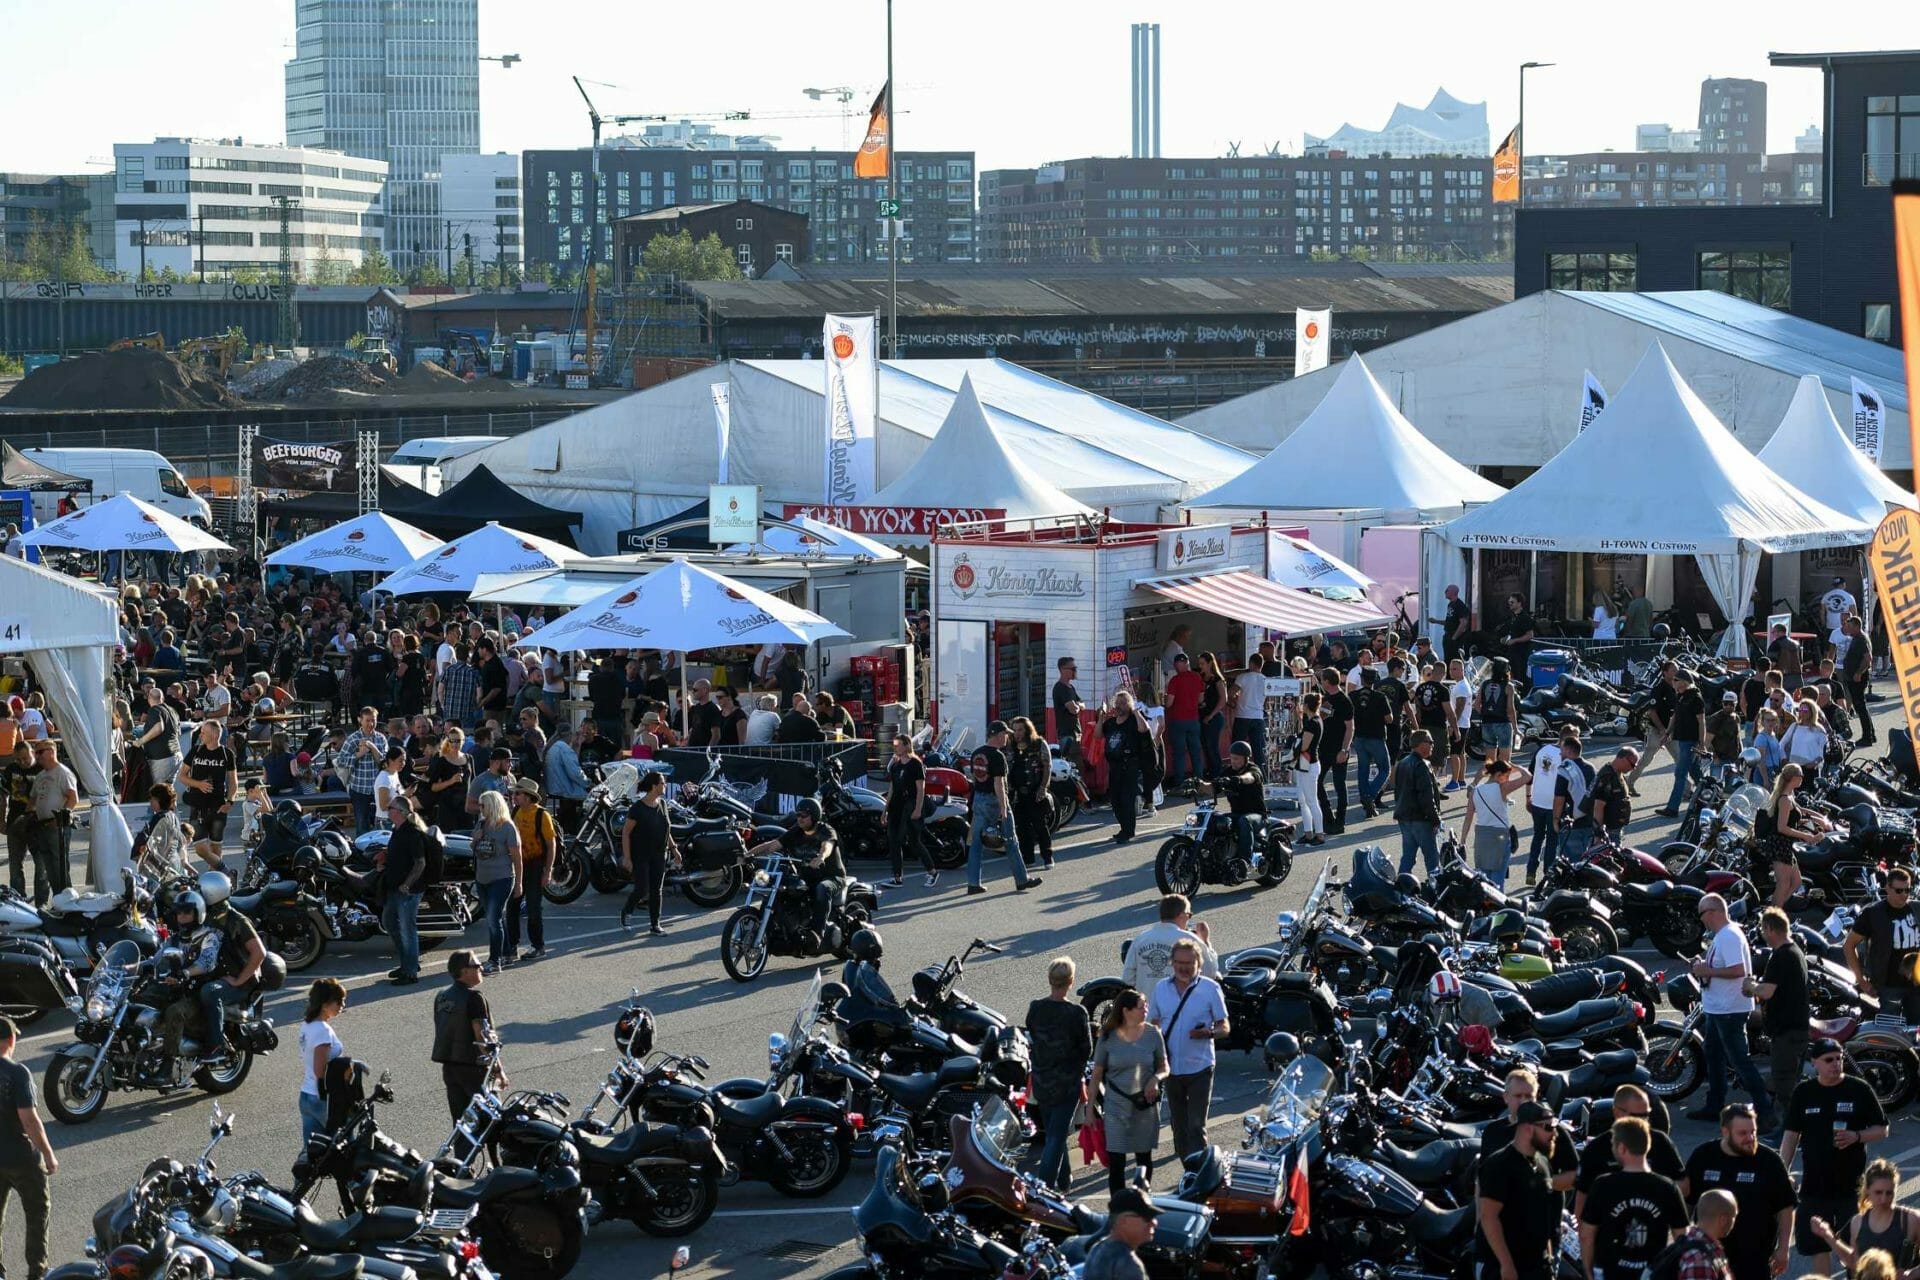 Hamburg Harley Days 2021 canceled
- also in the MOTORCYCLES.NEWS APP